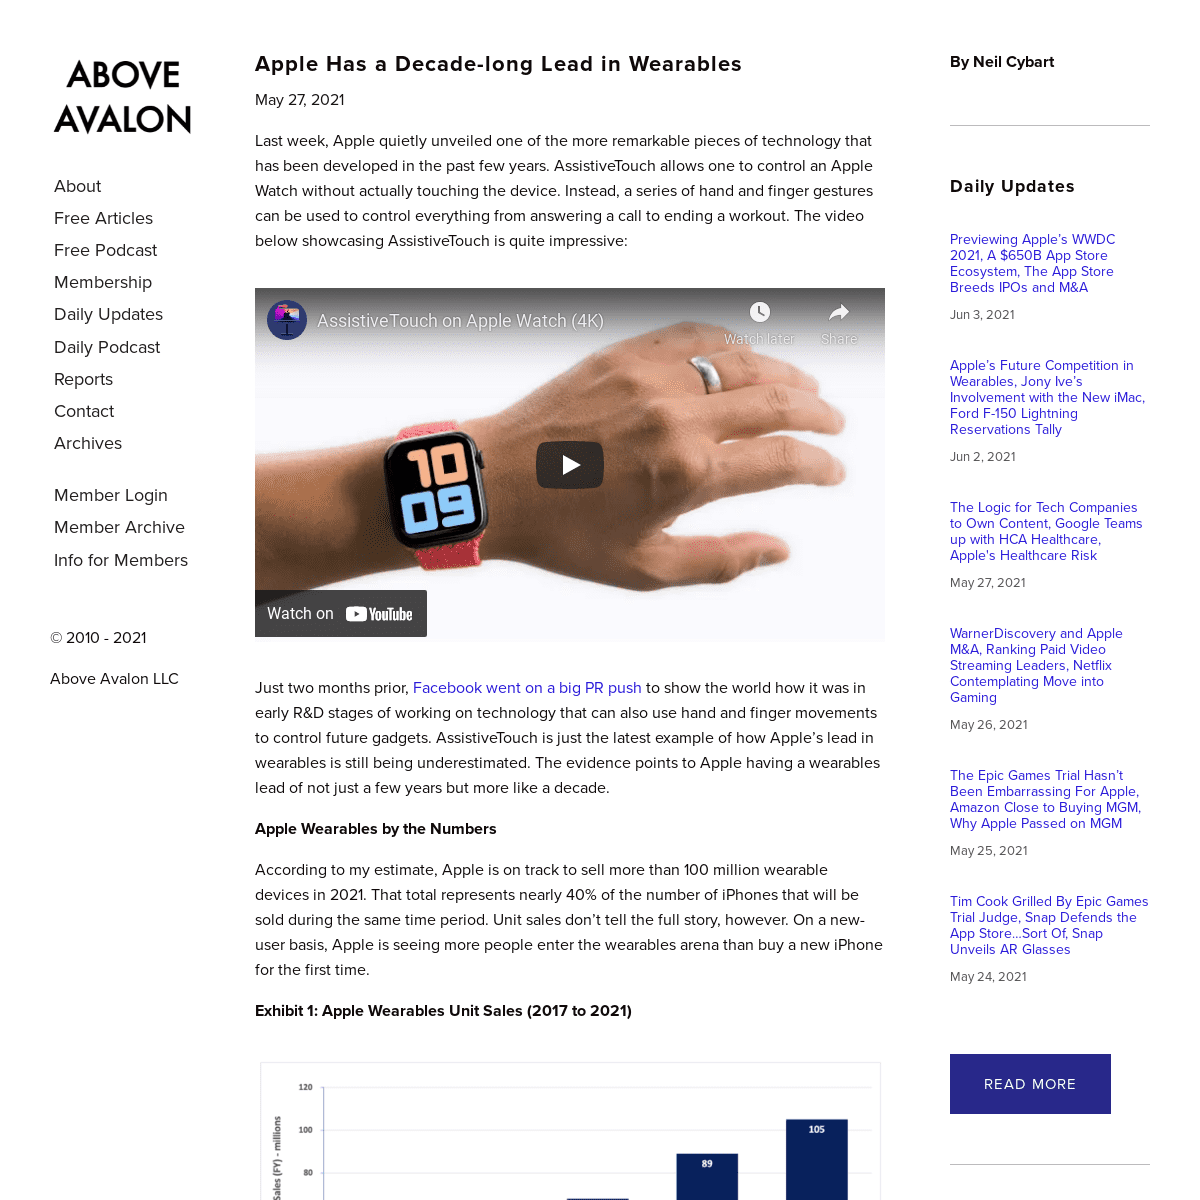 A complete backup of https://aboveavalon.com